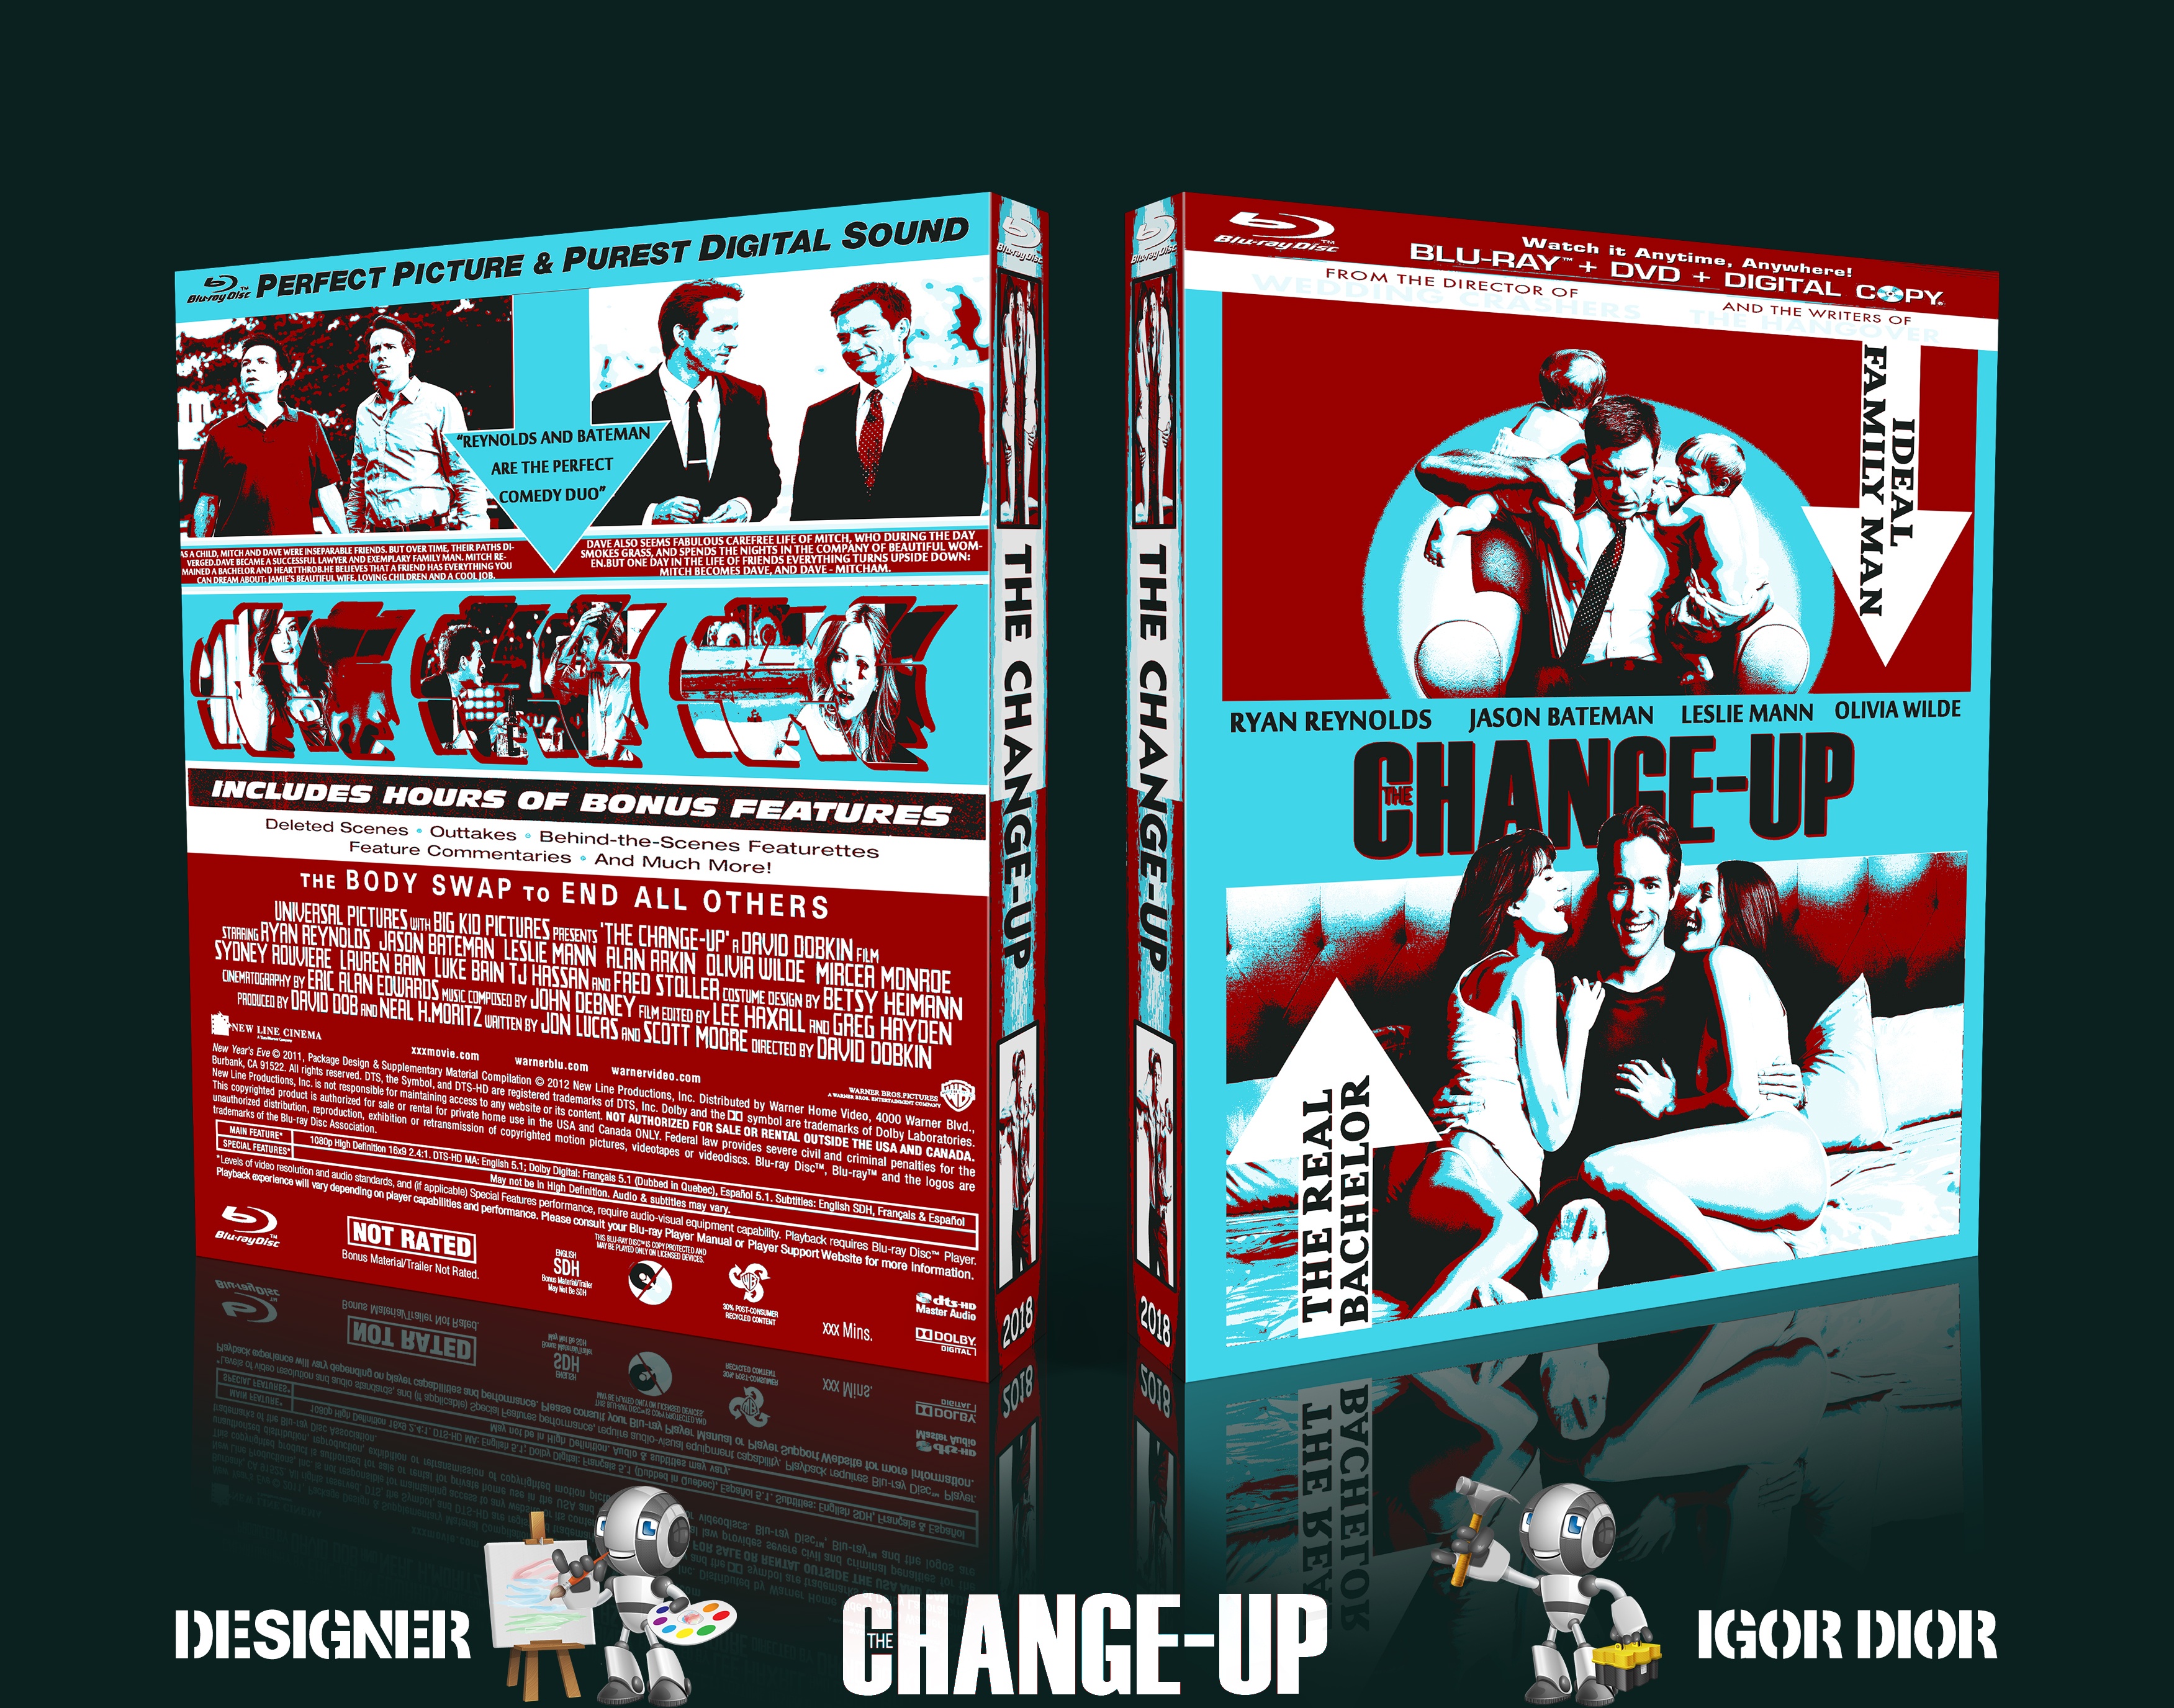 The Change-Up box cover